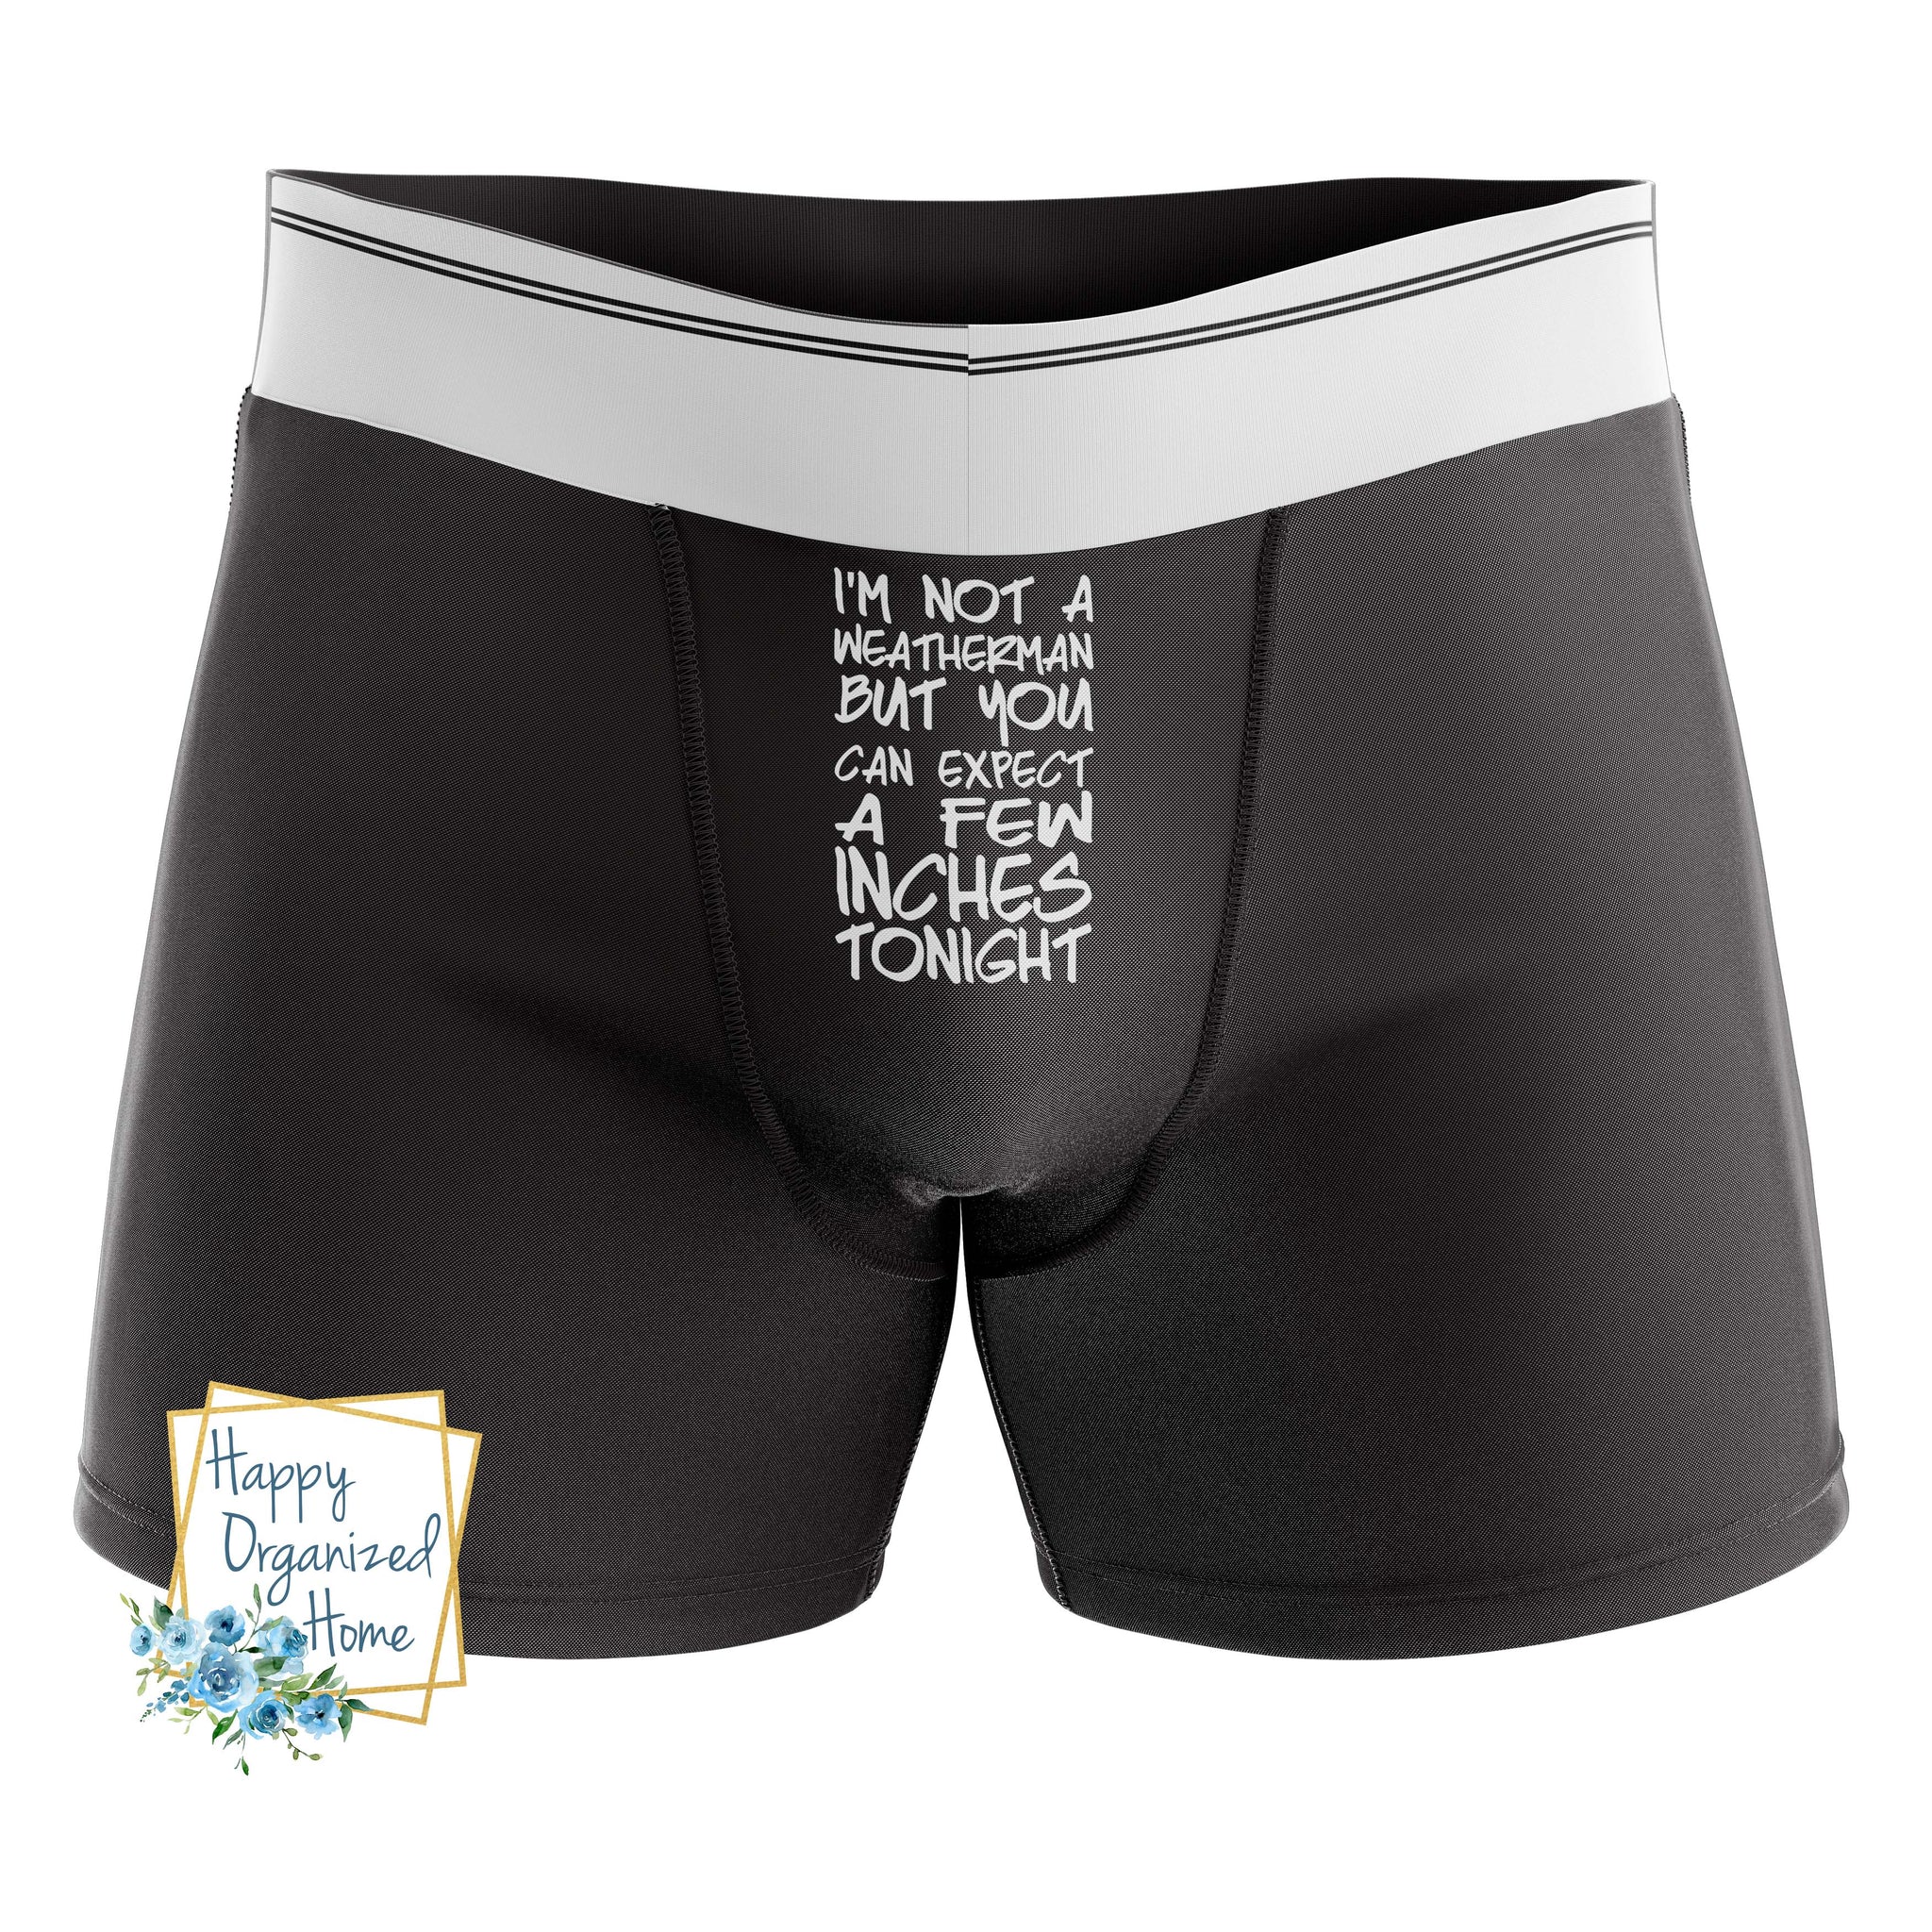 I'm not a weatherman but you can expect a few inches tonight - Men's Naughty Boxer Briefs